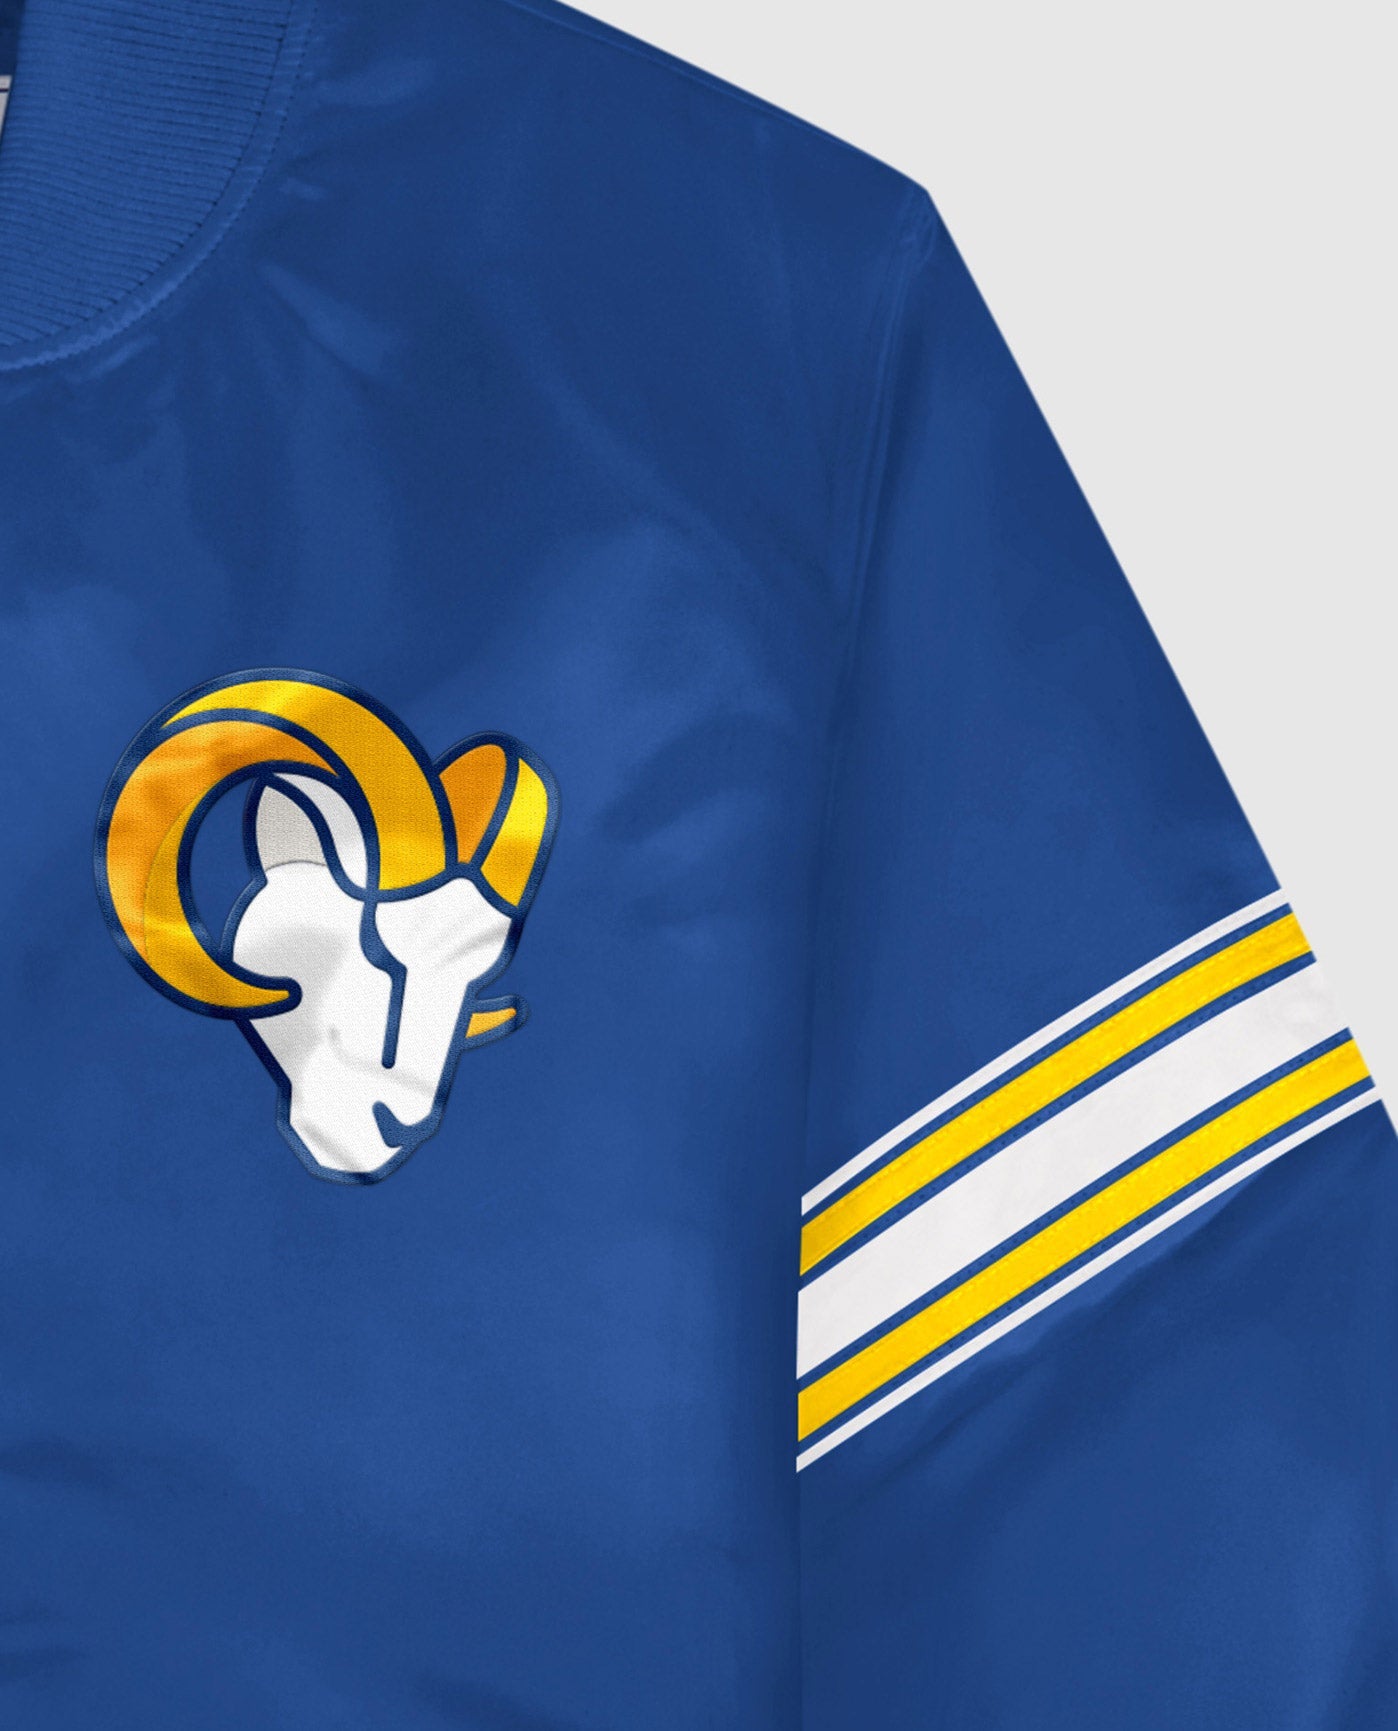 Los Angeles Rams Twill Applique Logo And Color Stripe Sleeve | Rams Blue